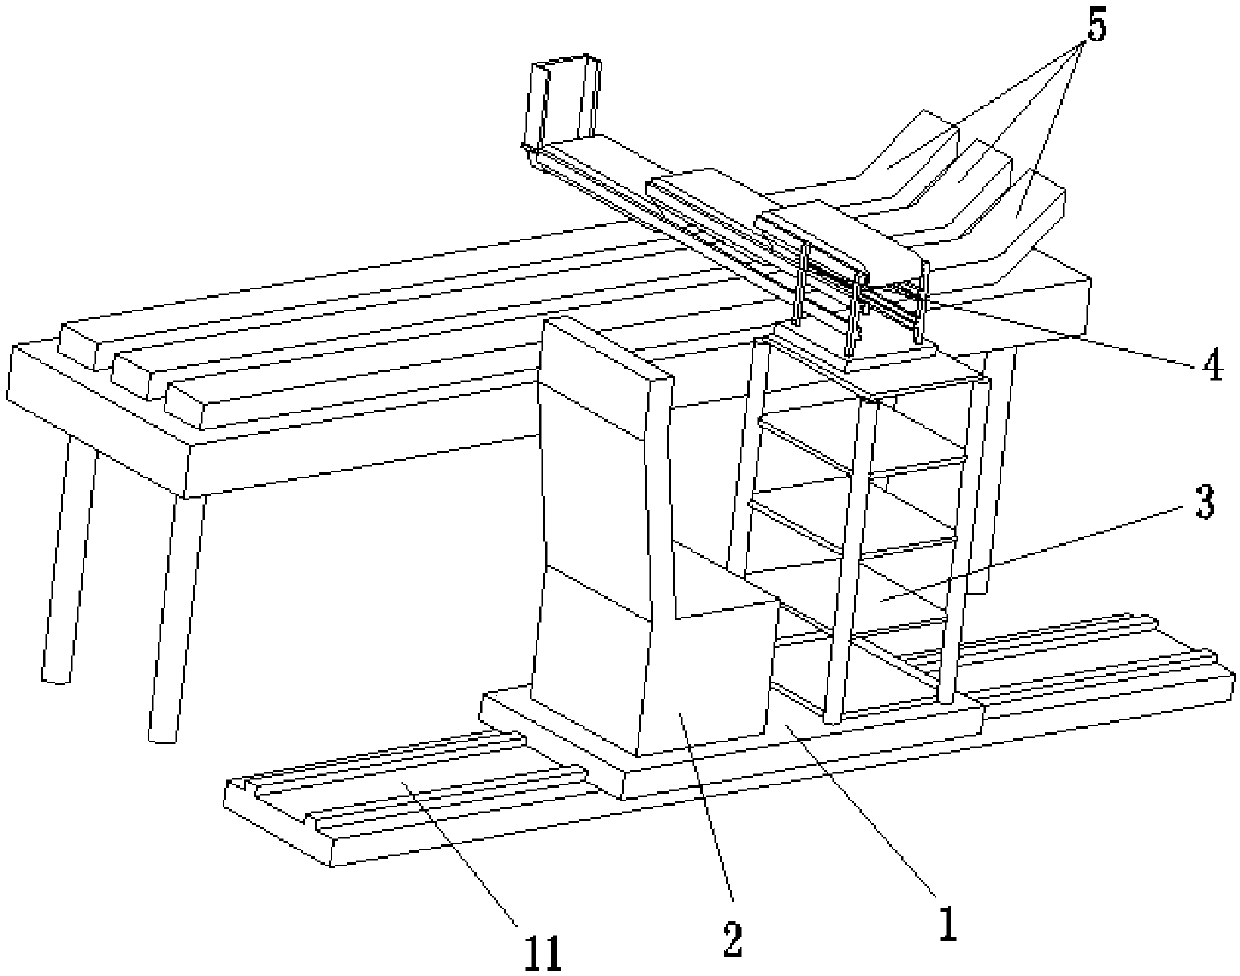 Automatic vegetable planting device